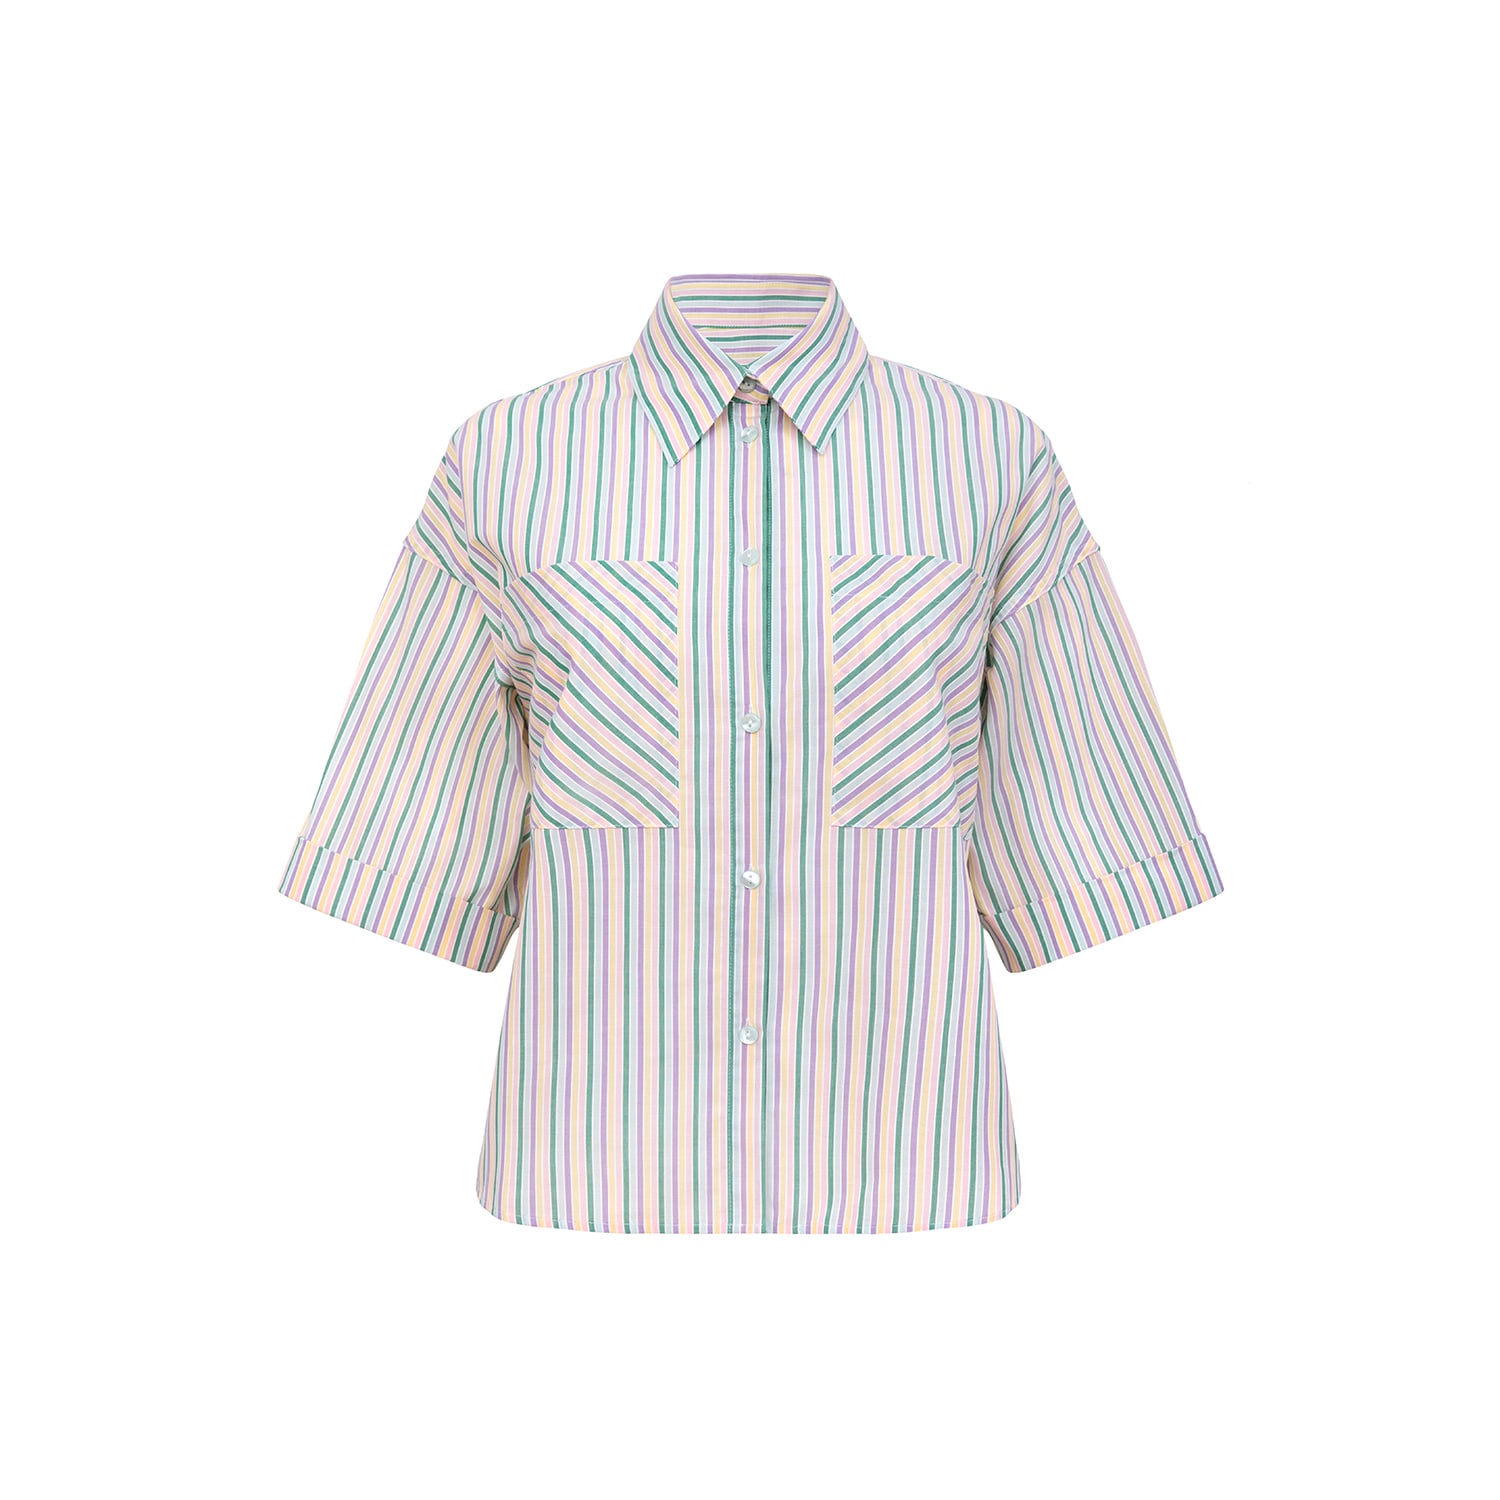 Blonde Gone Rogue Women's Ocean Drive Boxy Shirt, Upcycled Cotton, In Colourful Stripes In Neutral